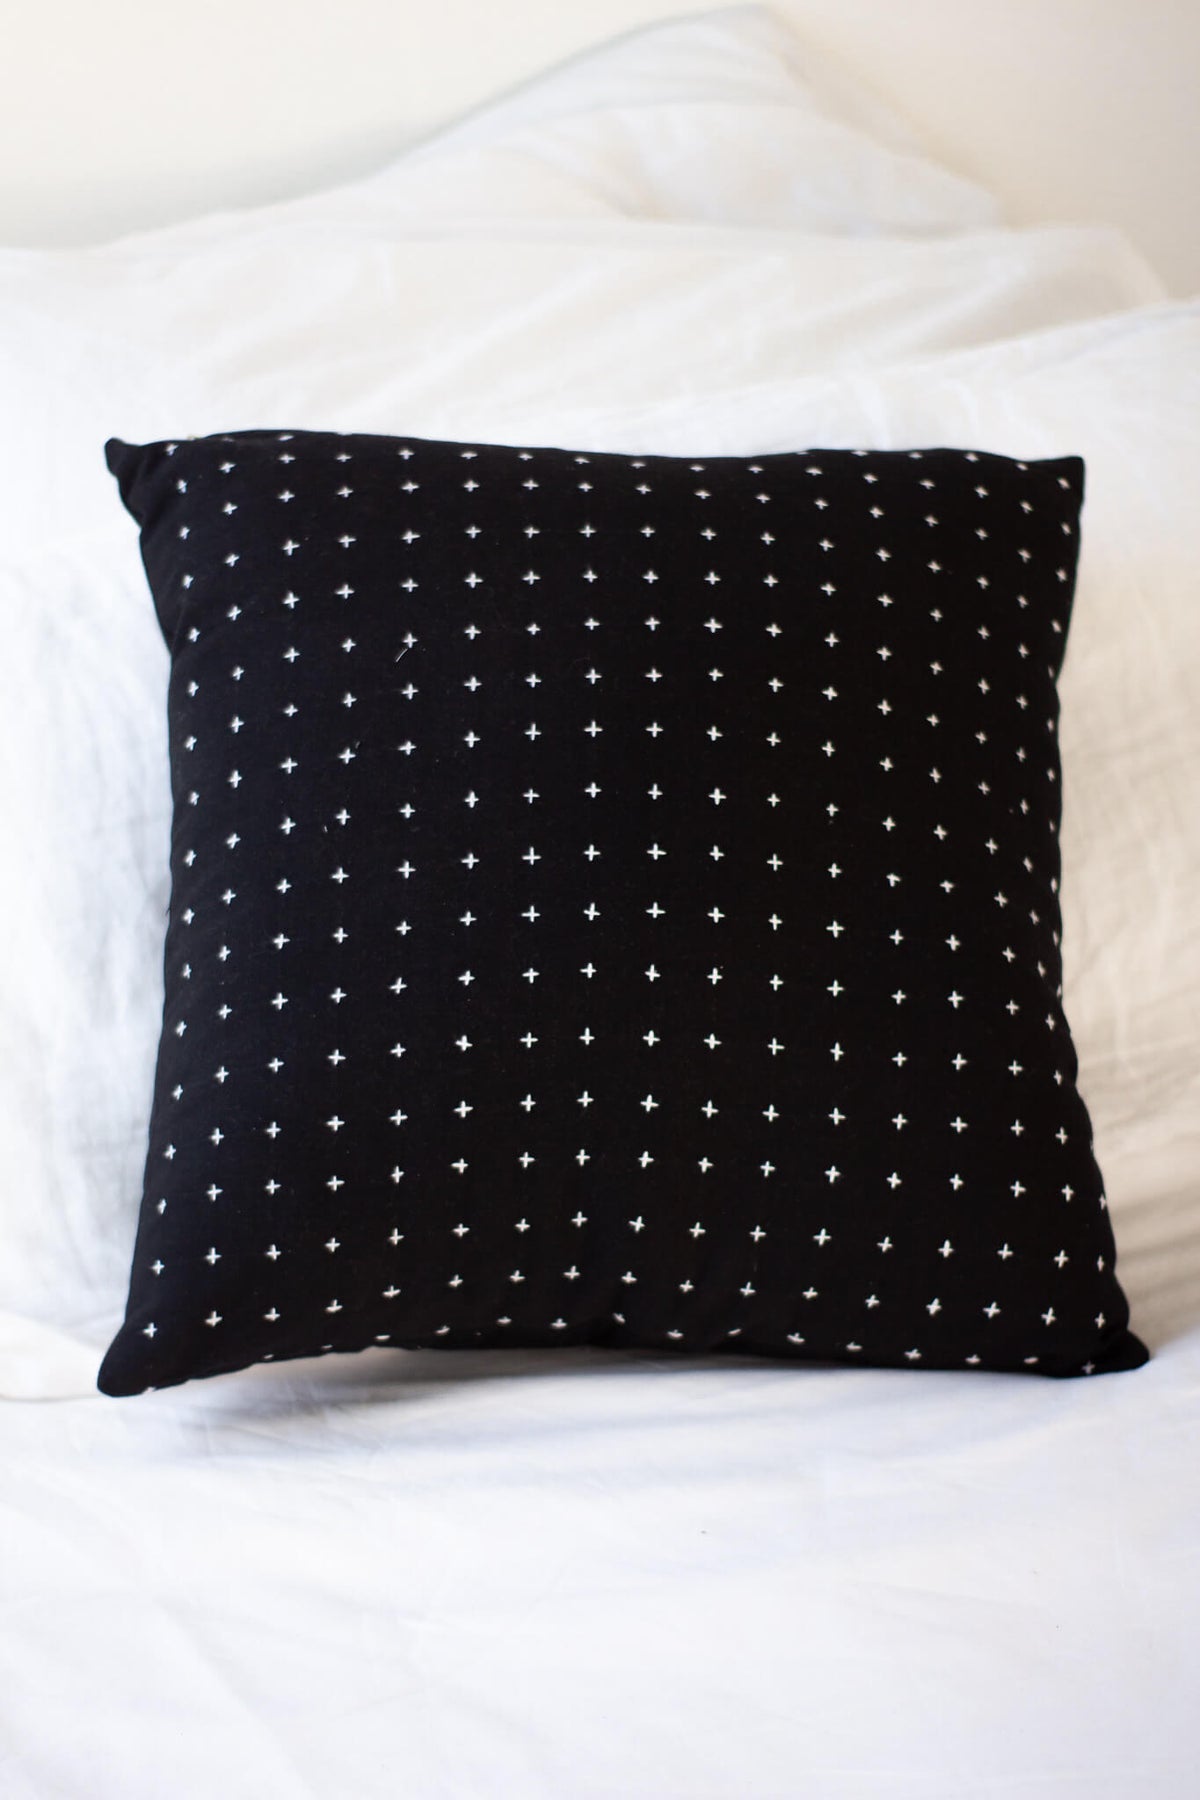 Anchal Project Medium Cross-Stitch Throw Pillow Cover- Charcoal